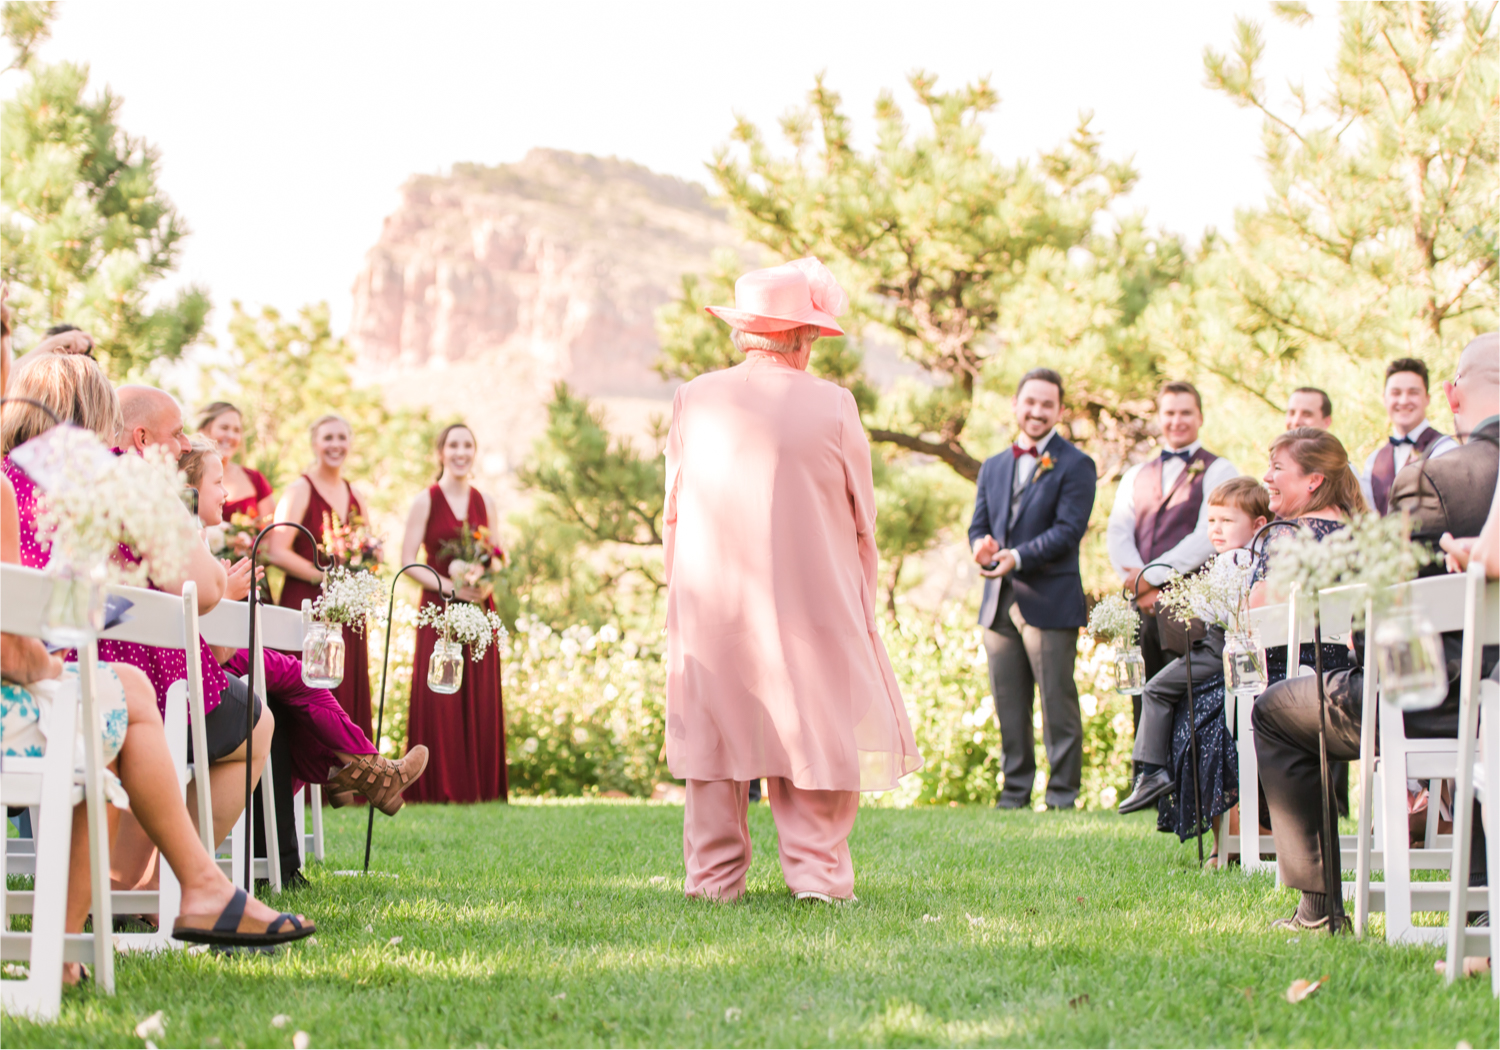 Romantic Whimsical Wedding at the Lionscrest Manor in Lyons, CO | Britni Girard Photography - Wedding Photo and Video Team | Rustic Fall Decor mixed in Burgundy, Blush, Gold and Sage | Wedding Dress from Anna Be Bridal by Hailey Paige | Hair and Makeup by Glam 5280 Chaundra Revier | Florals by Aflorae | Ceremony Site overlooking the Rocky Mountains | Mountaintop Ceremony | Grandma flowergirl | Flowergirl Alternatives